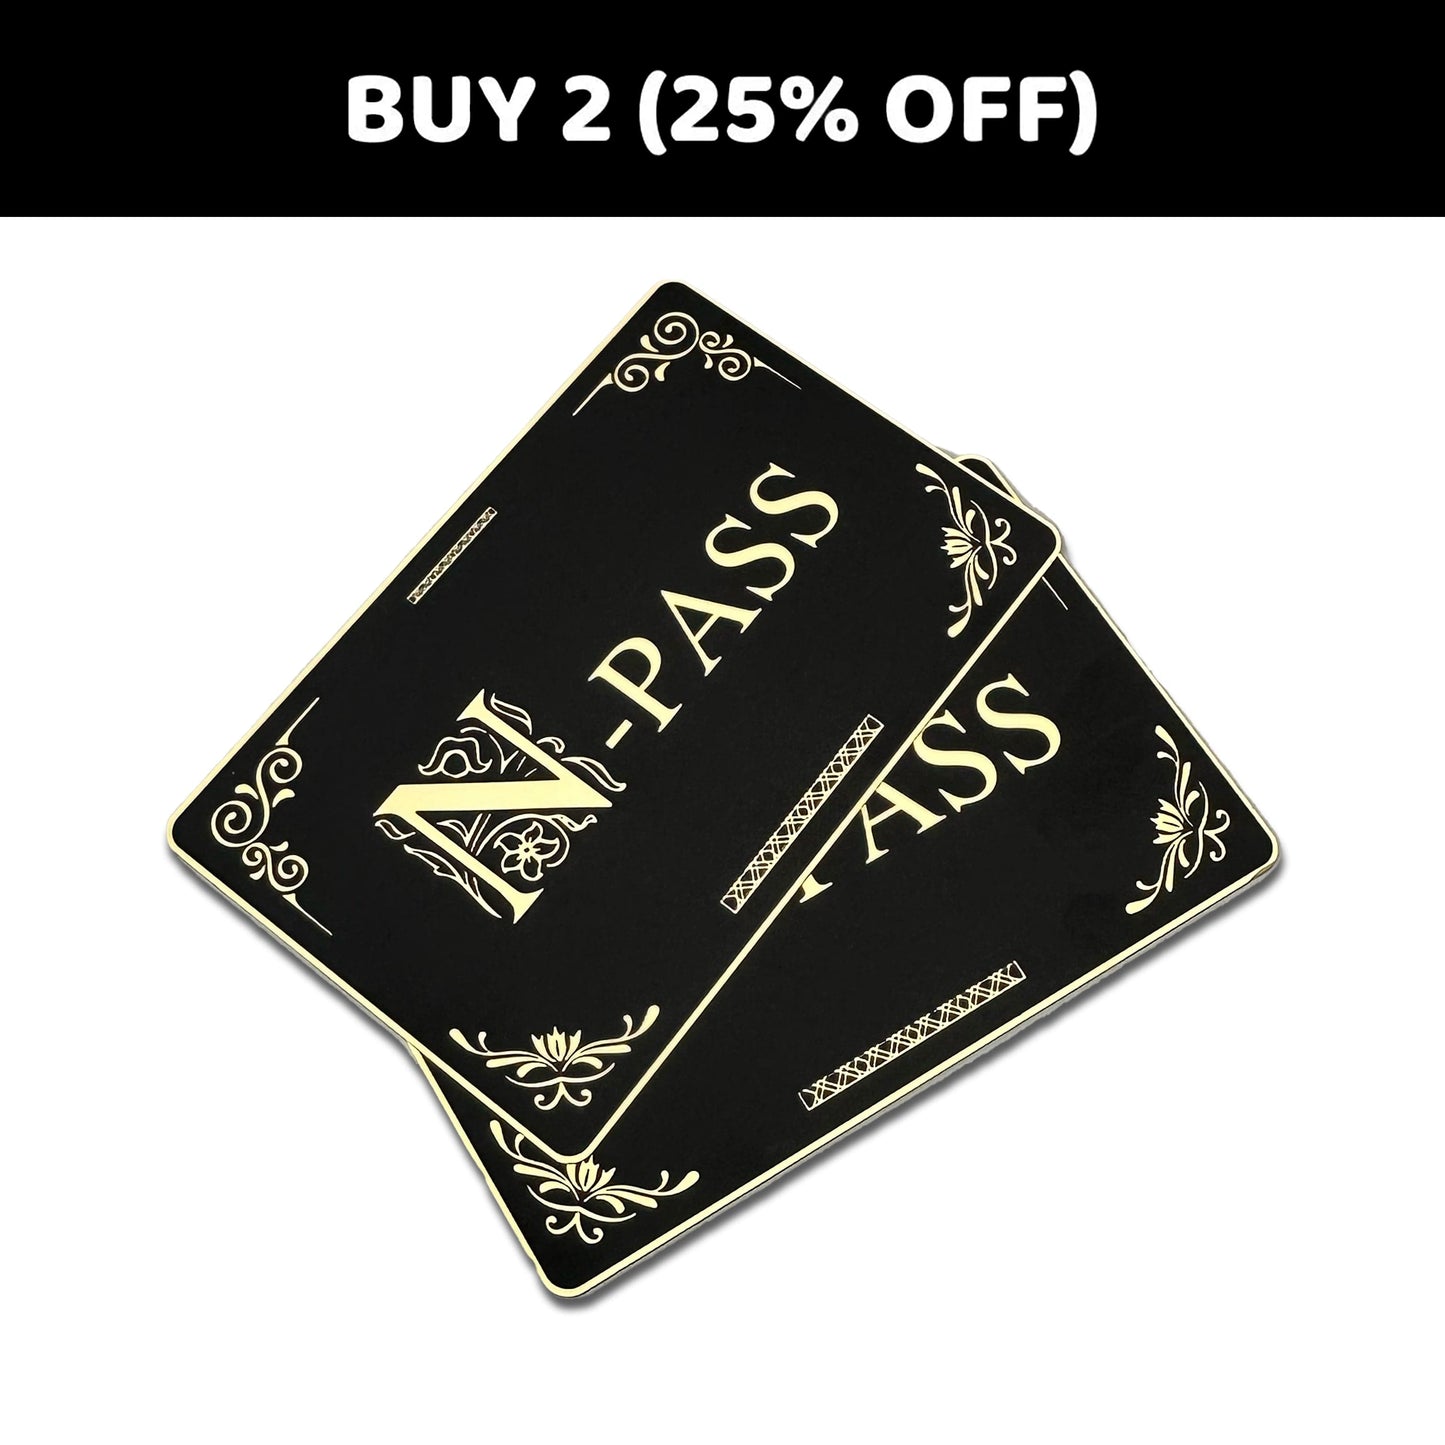 The Official N-Pass